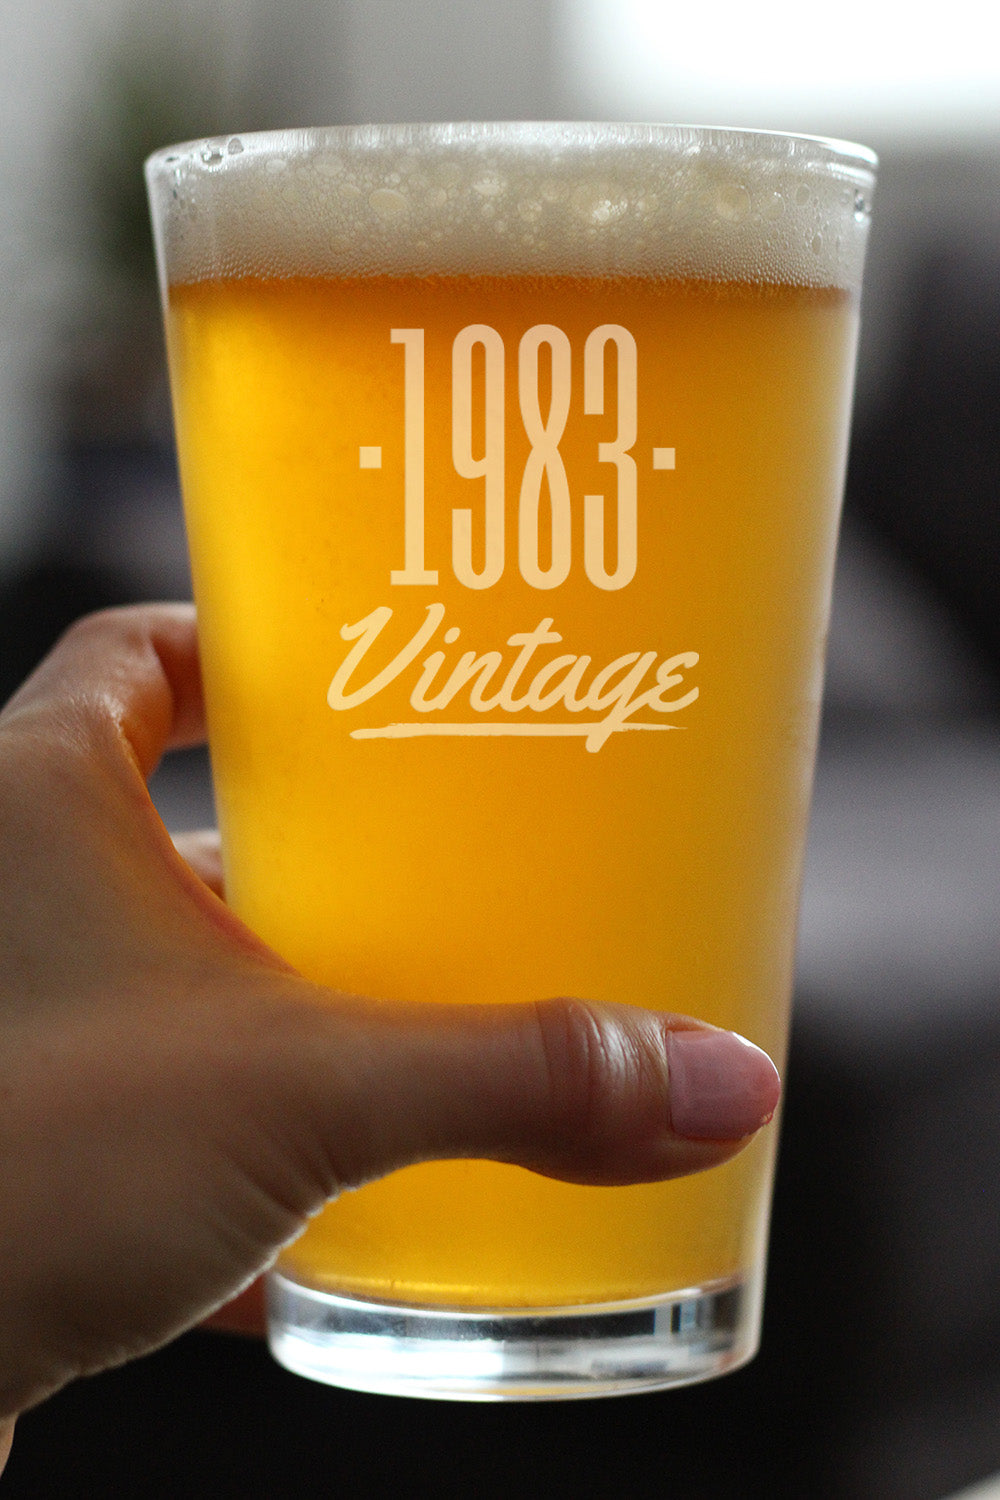 Vintage 1983 - Pint Glass for Beer - 41st Birthday Gifts for Men or Women Turning 41 - Fun Bday Party Decor - 16 oz